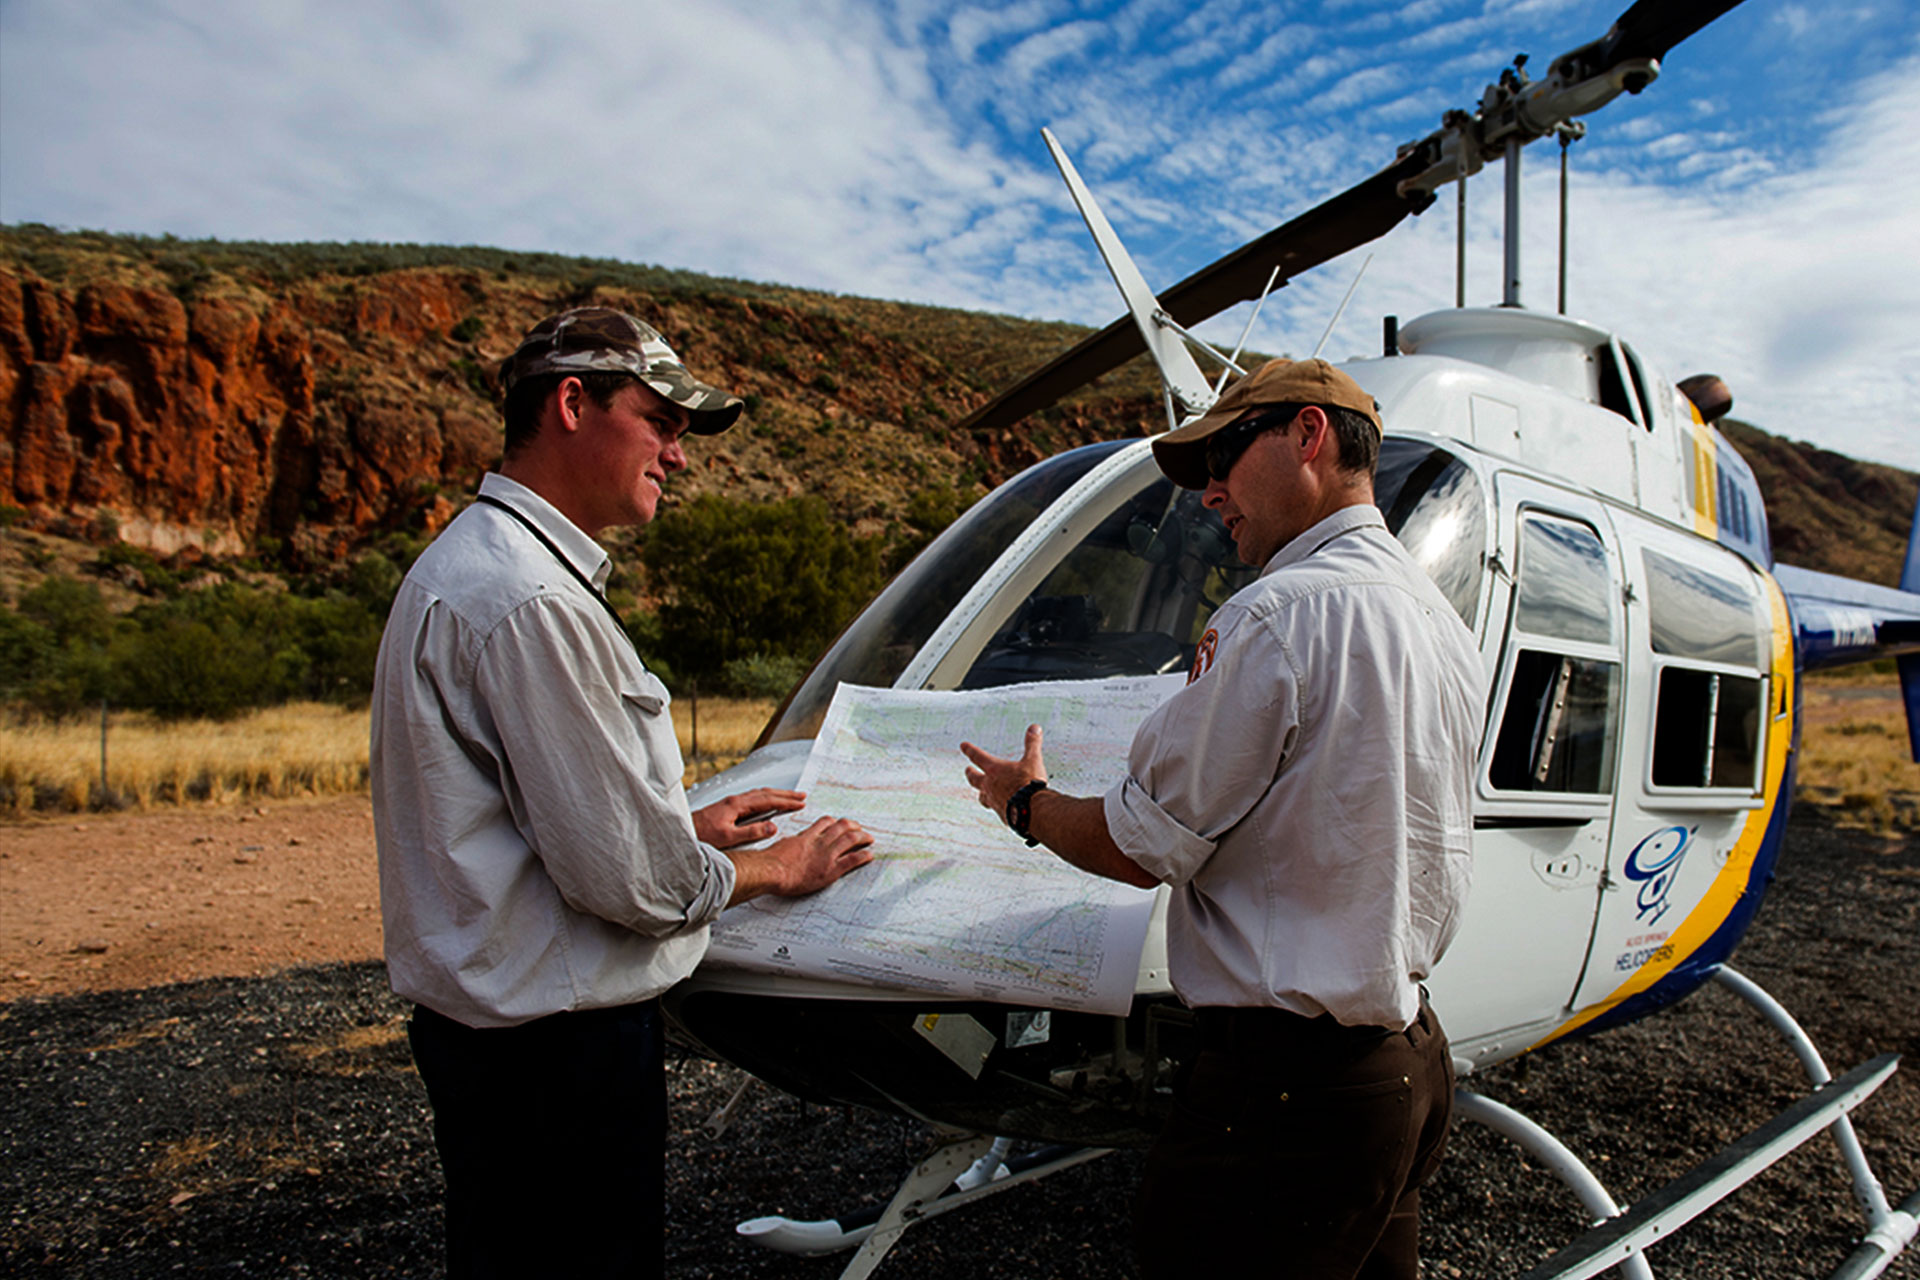 Rangers with a map in front of a helicopter.